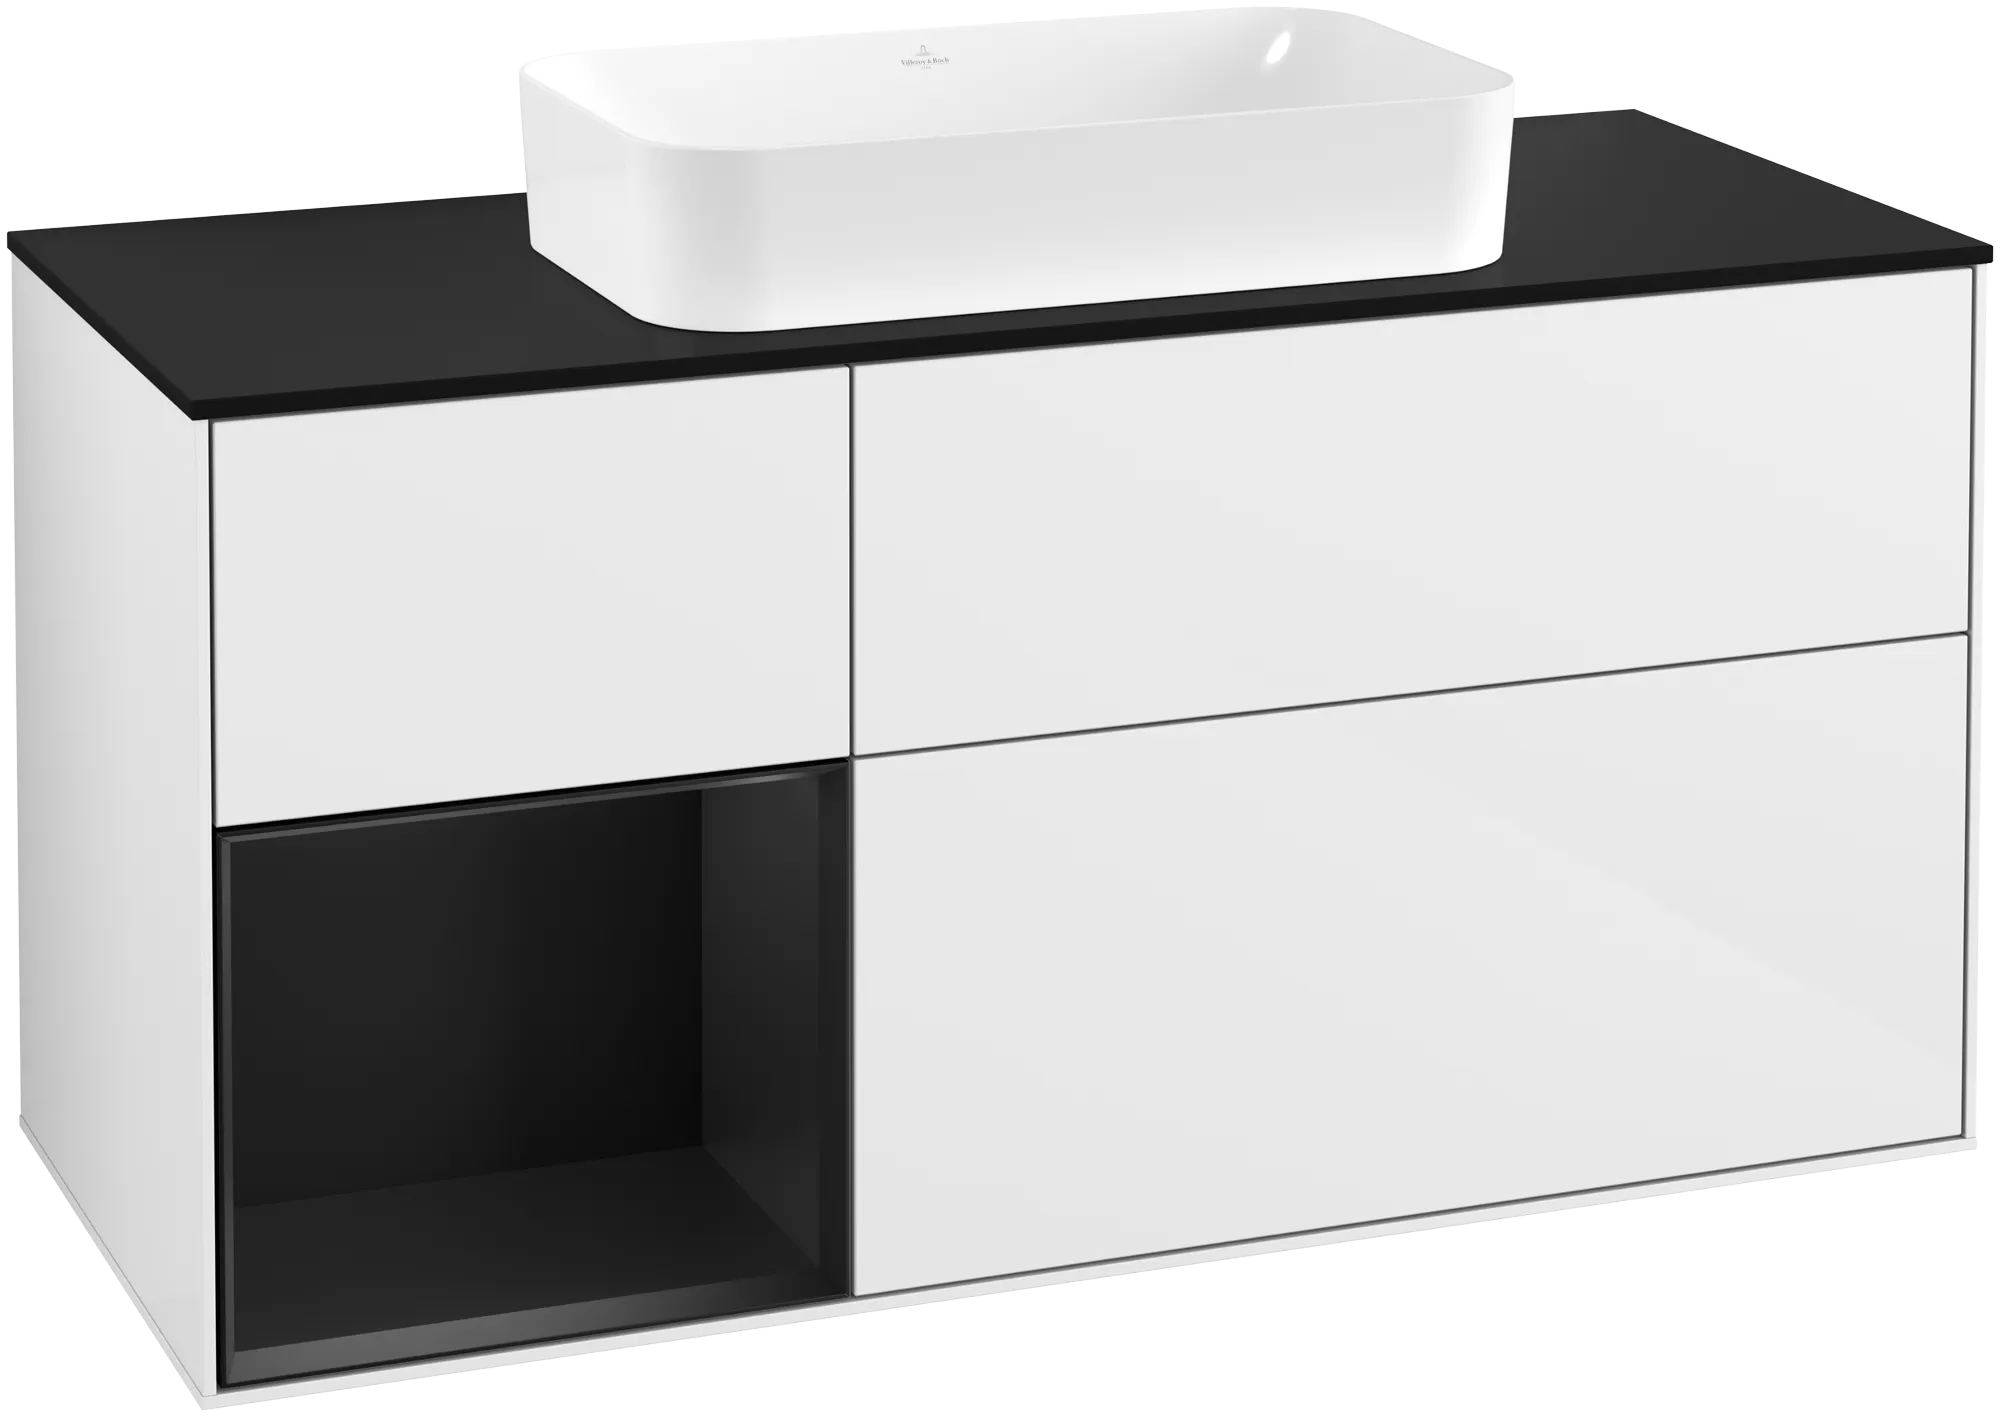 Picture of VILLEROY BOCH Finion Vanity unit, with lighting, 3 pull-out compartments, 1200 x 603 x 501 mm, Glossy White Lacquer / Black Matt Lacquer / Glass Black Matt #G292PDGF